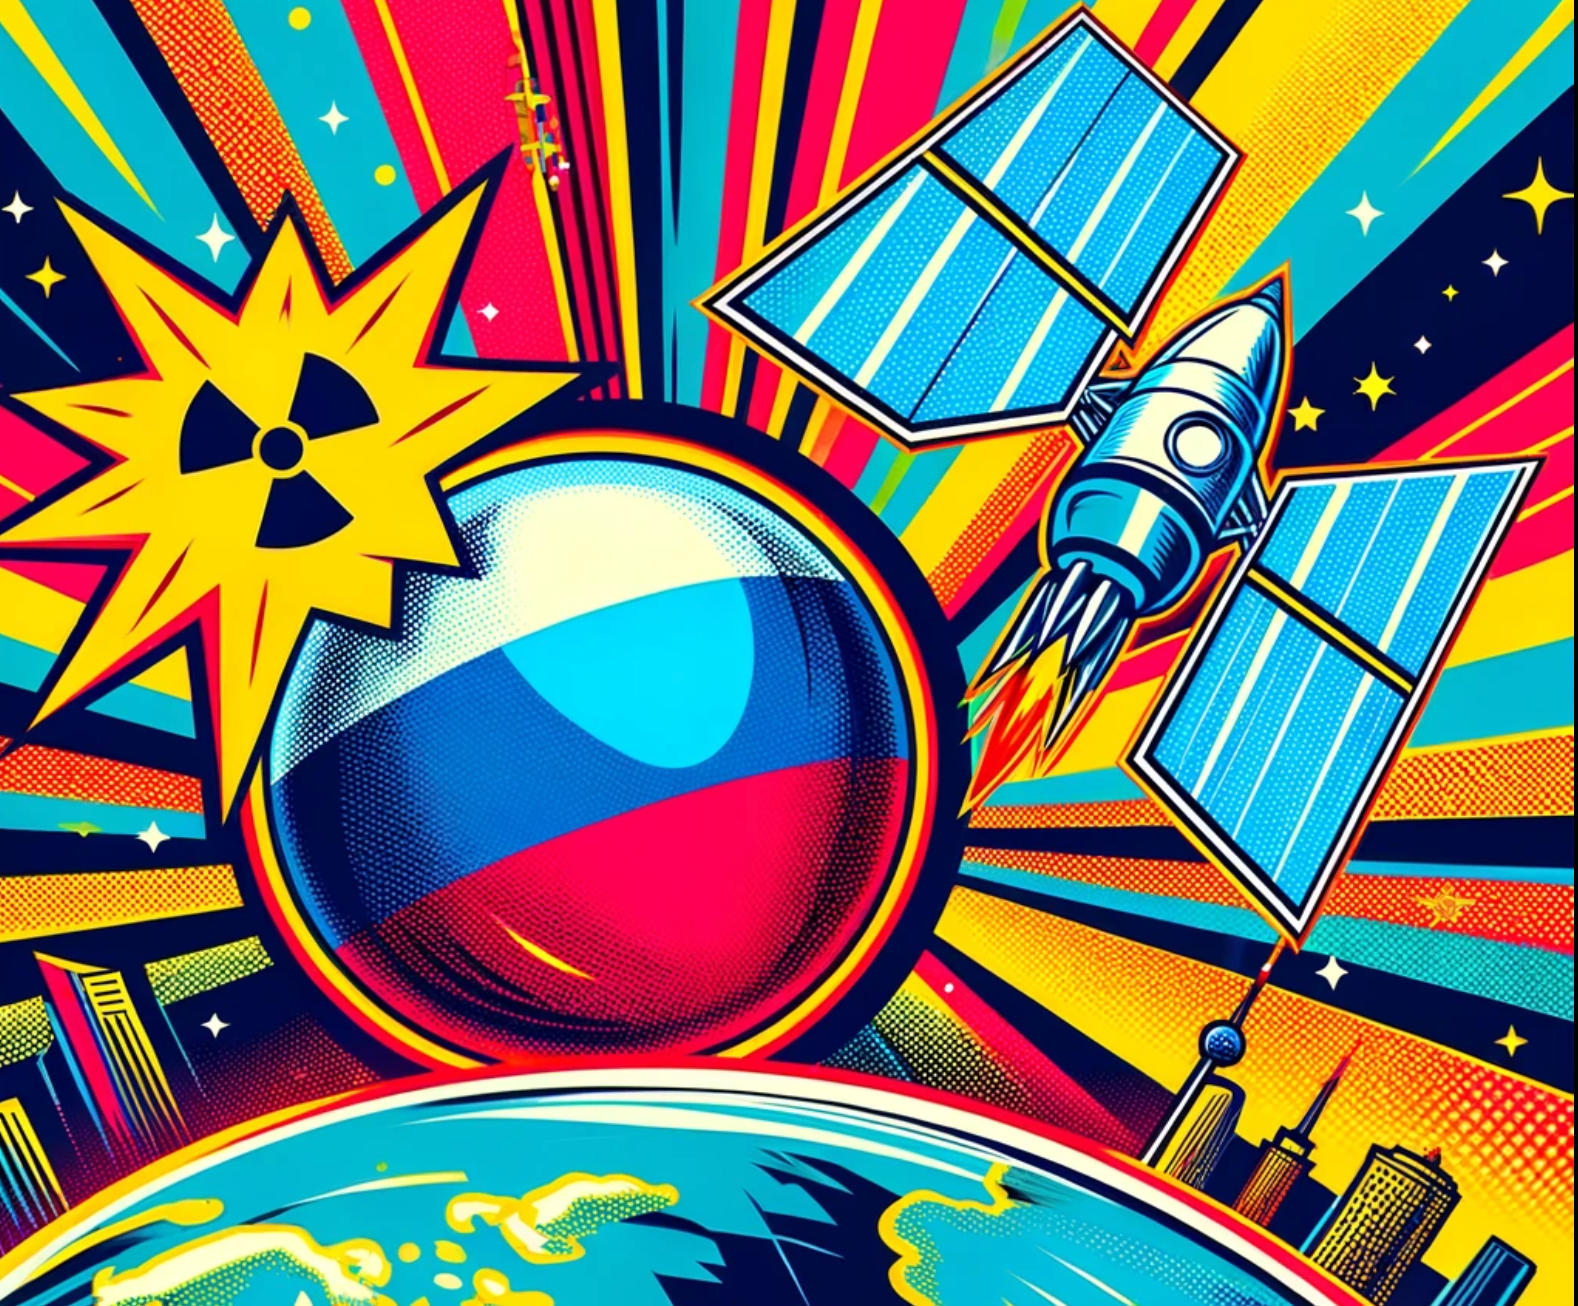 Orbital Dominance: Is Russia’s Space-Based Nuclear Threat a Tale-